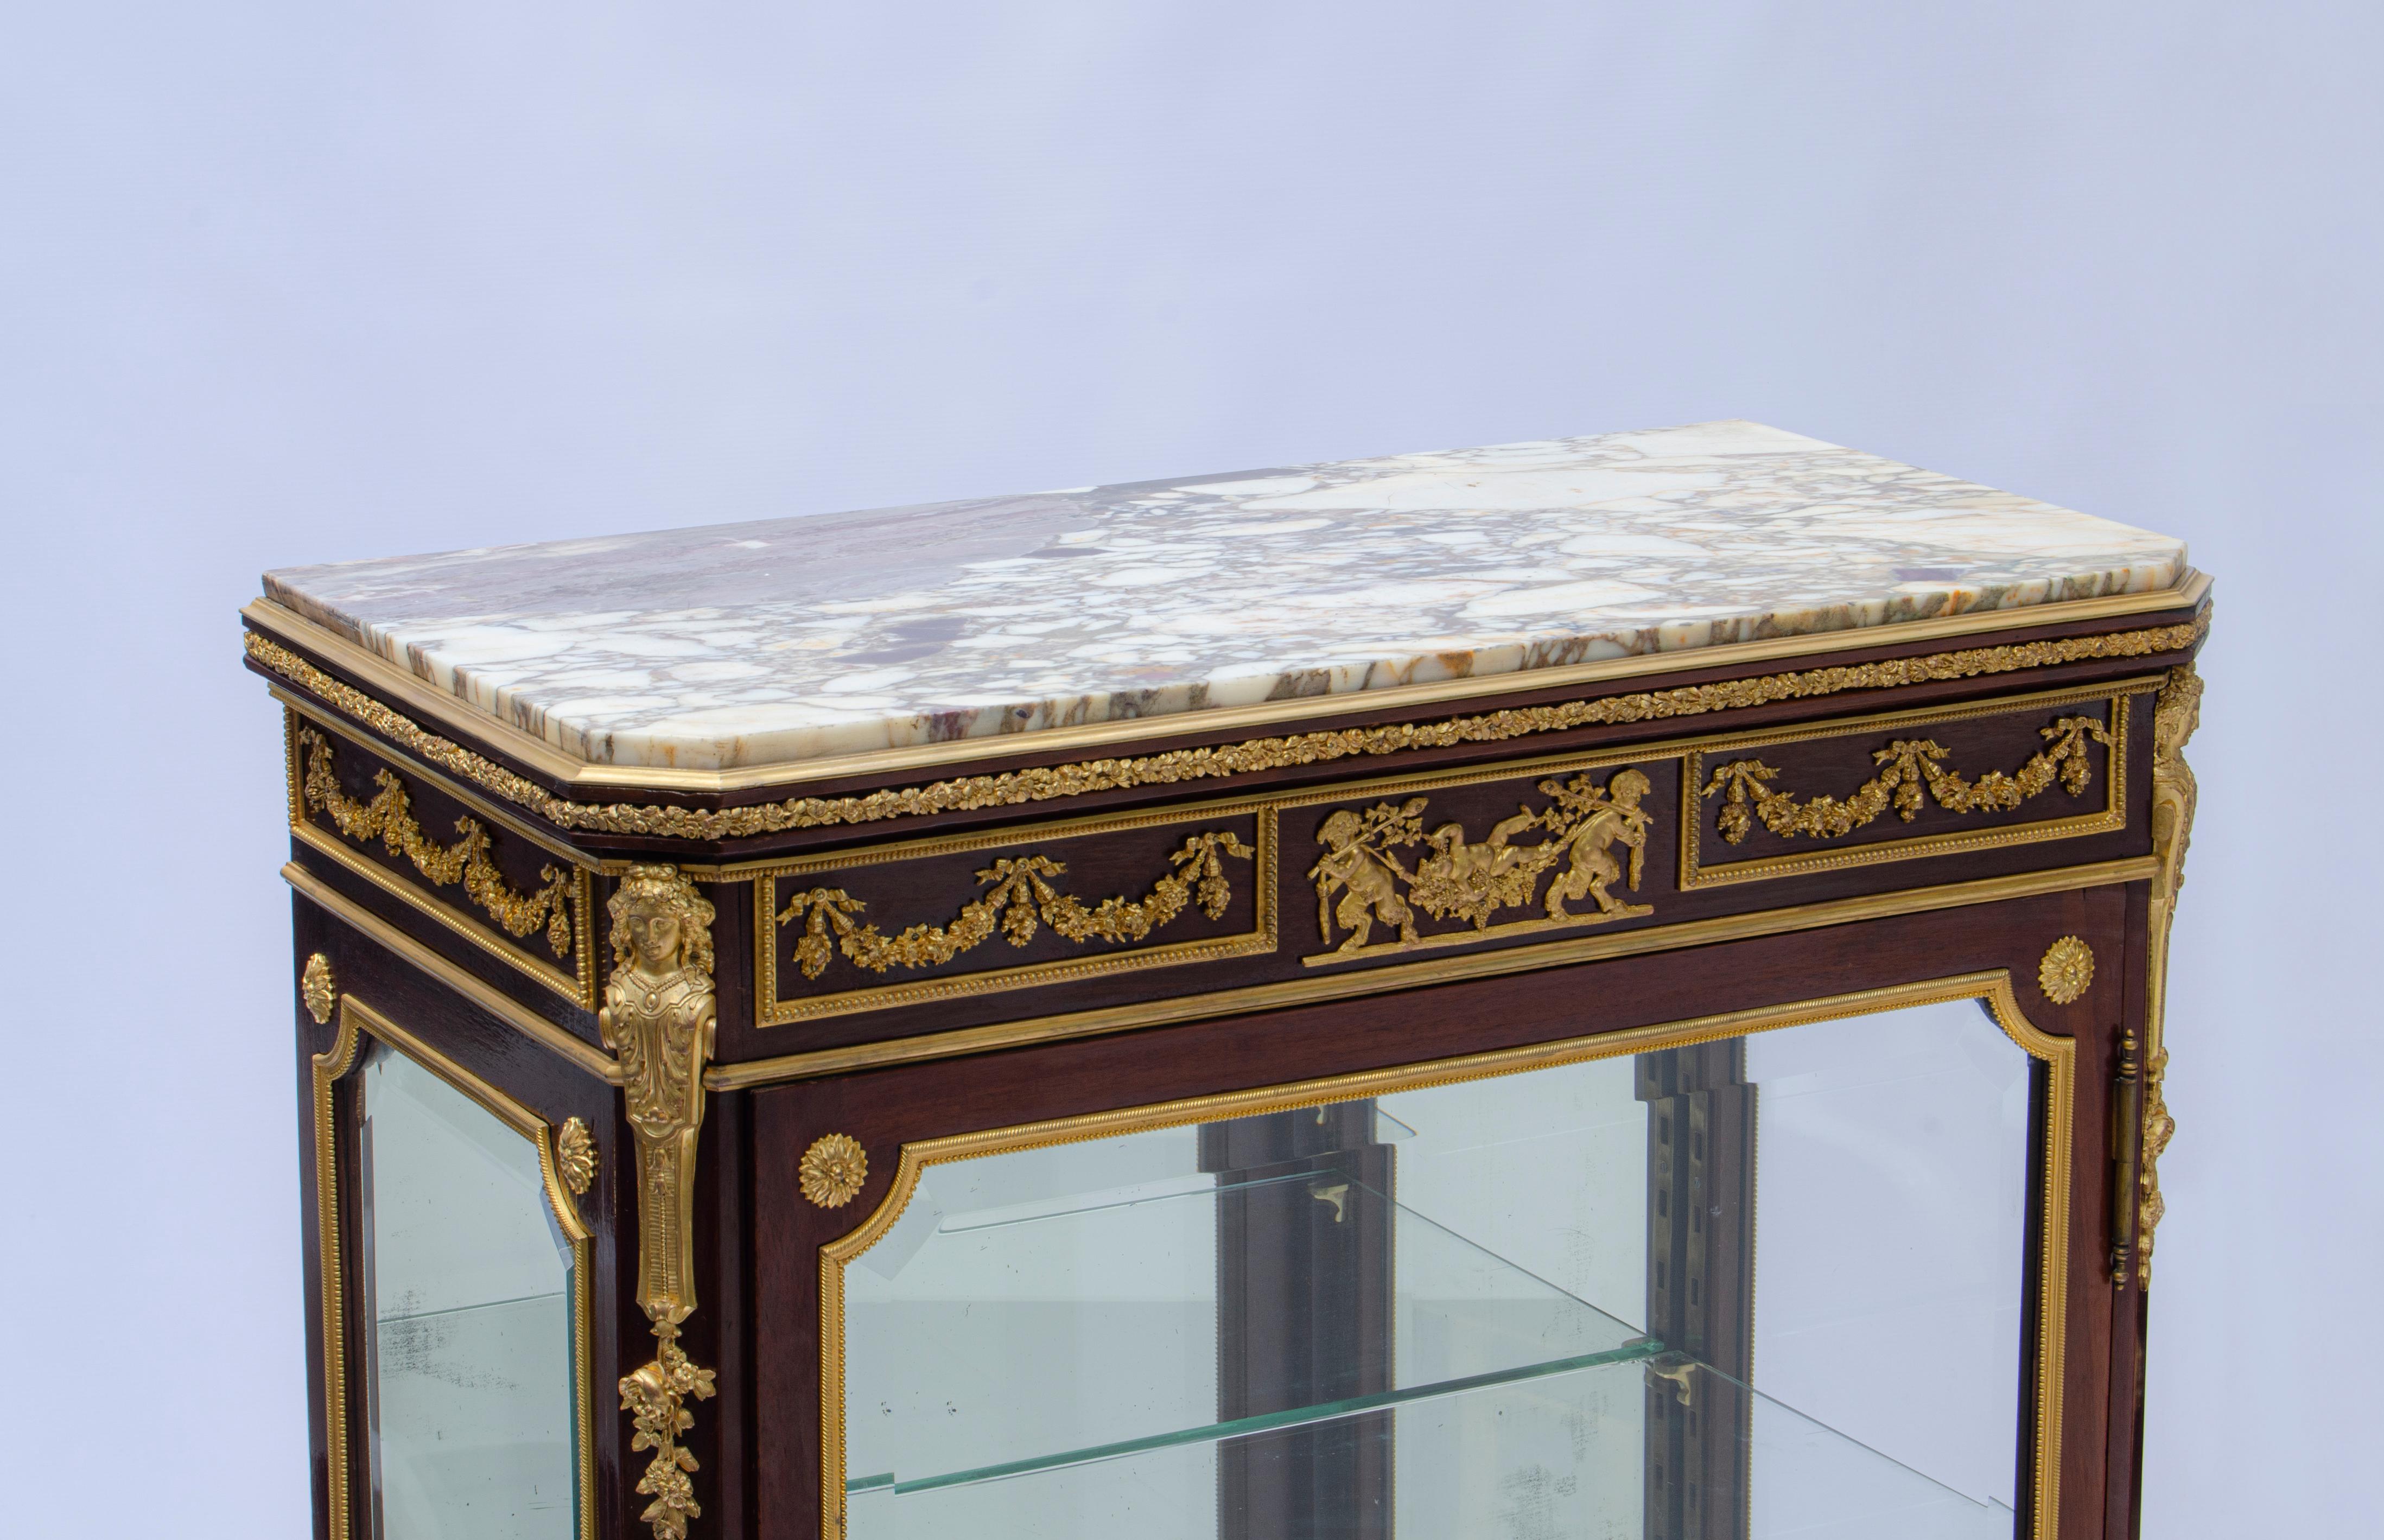 Louis XV style vitrine by François Linke (1855 - 1946) Made of gilt bronze mounted wood, with a violet breccia marble top, front and beveled glass panels on the sides. The central frieze has satyrs leading a drunken bacchus surrounded by ribbon-tied